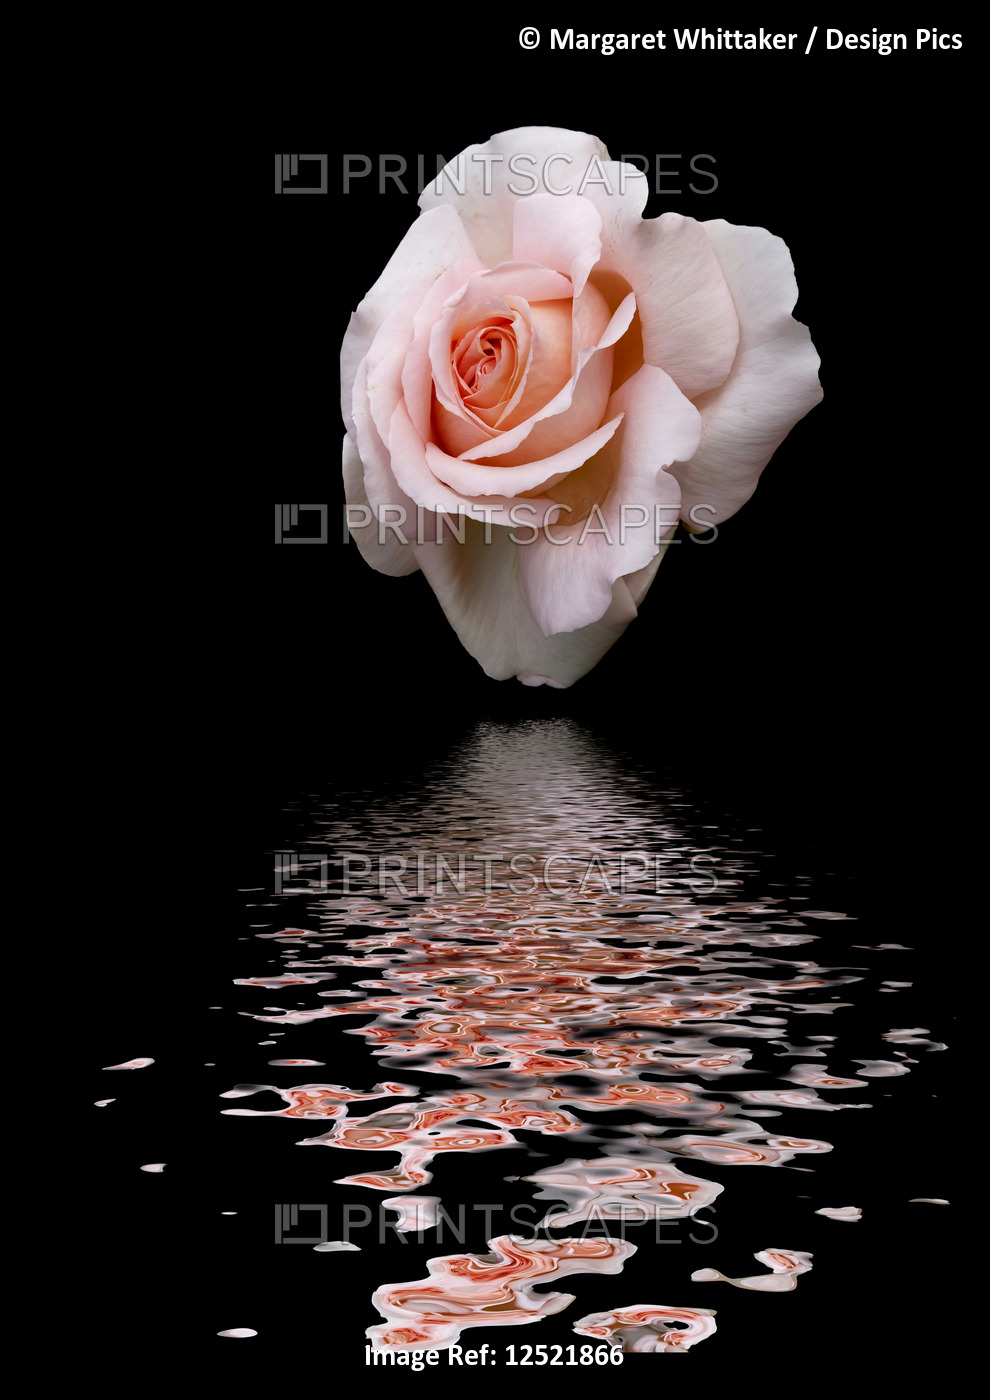 Art image of rose 'Chandos Beauty' reflected in water